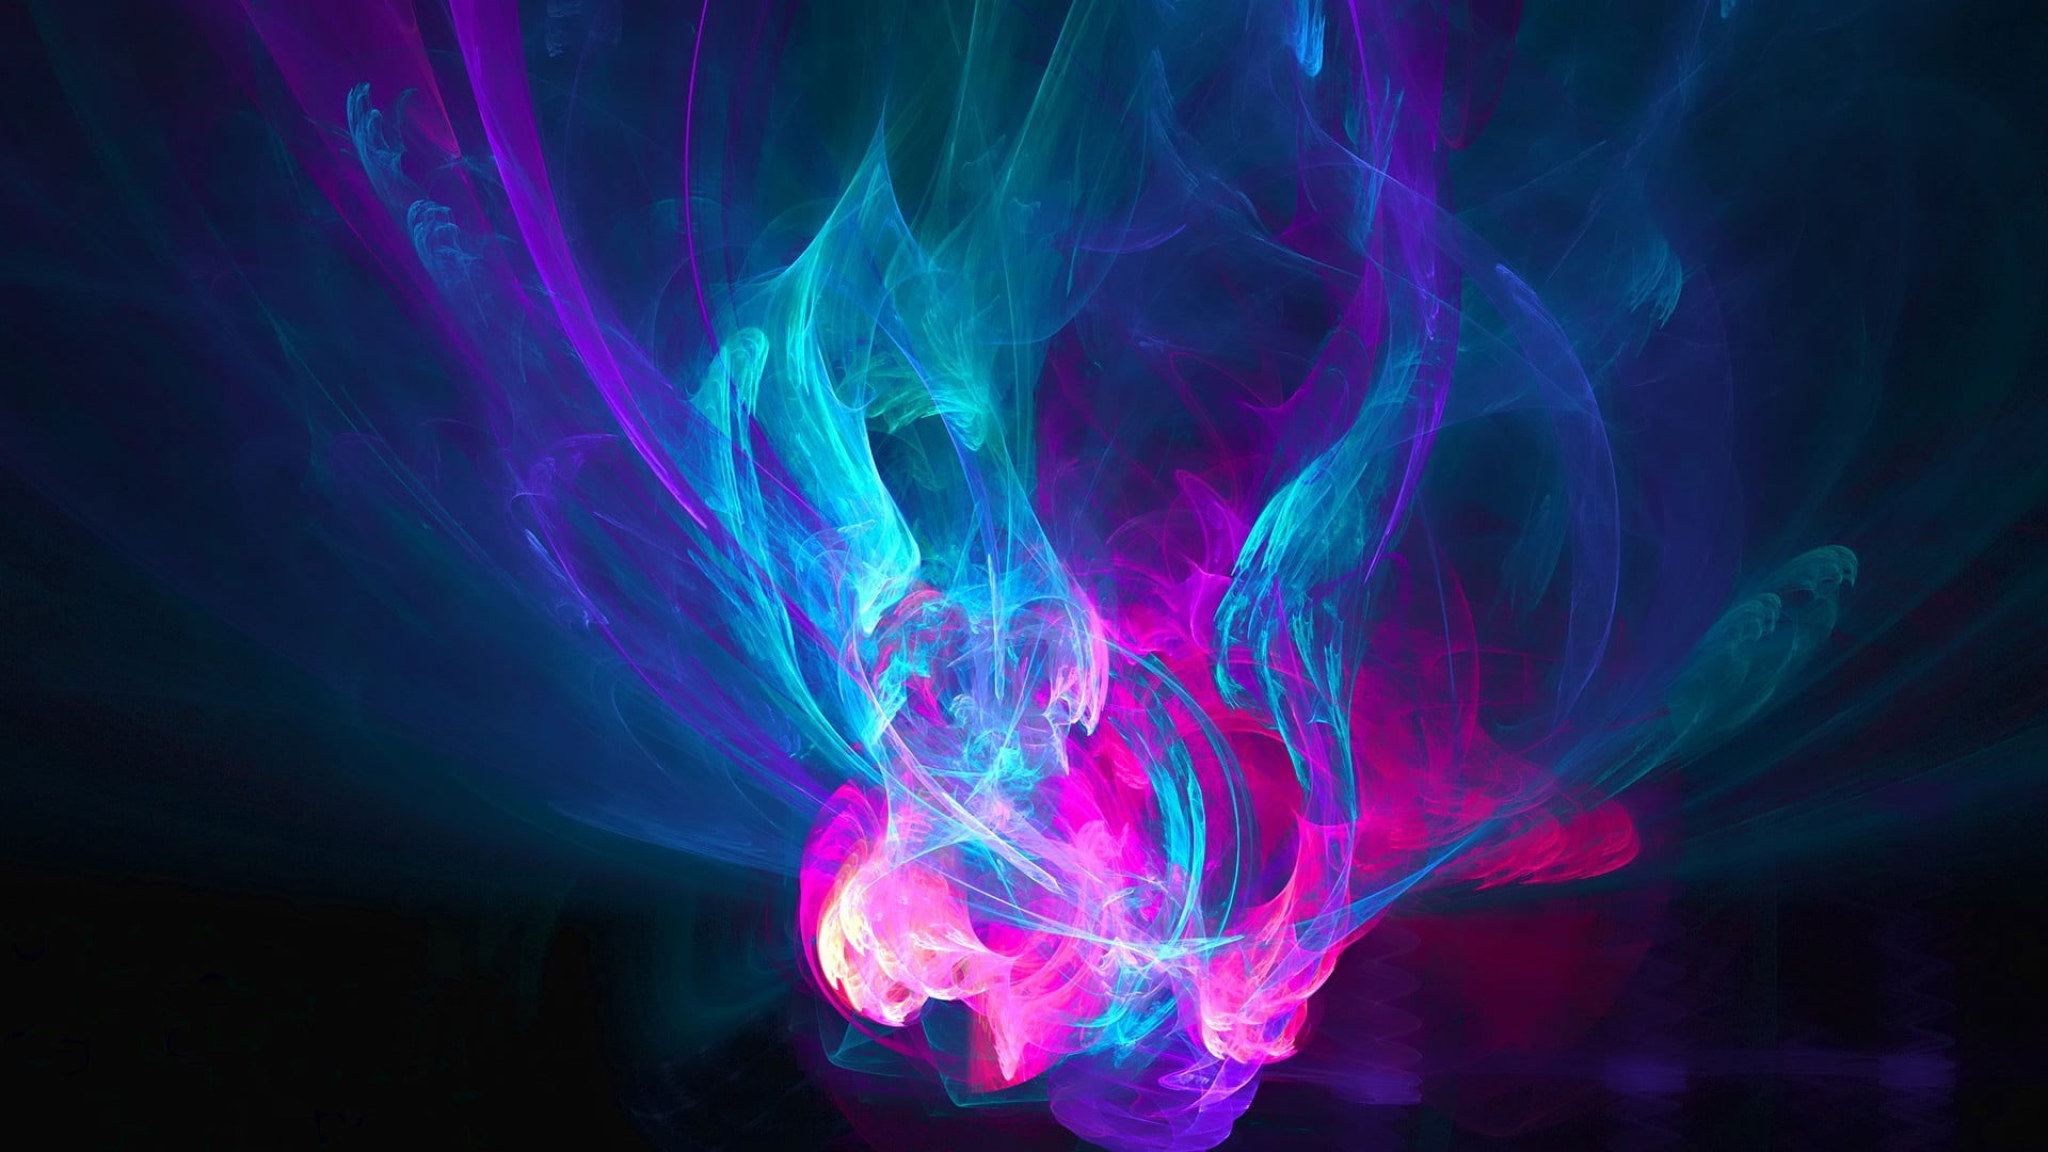 Wallpaper Teal, Pink, And Blue Flame • Wallpaper For You HD Wallpaper For Desktop & Mobile